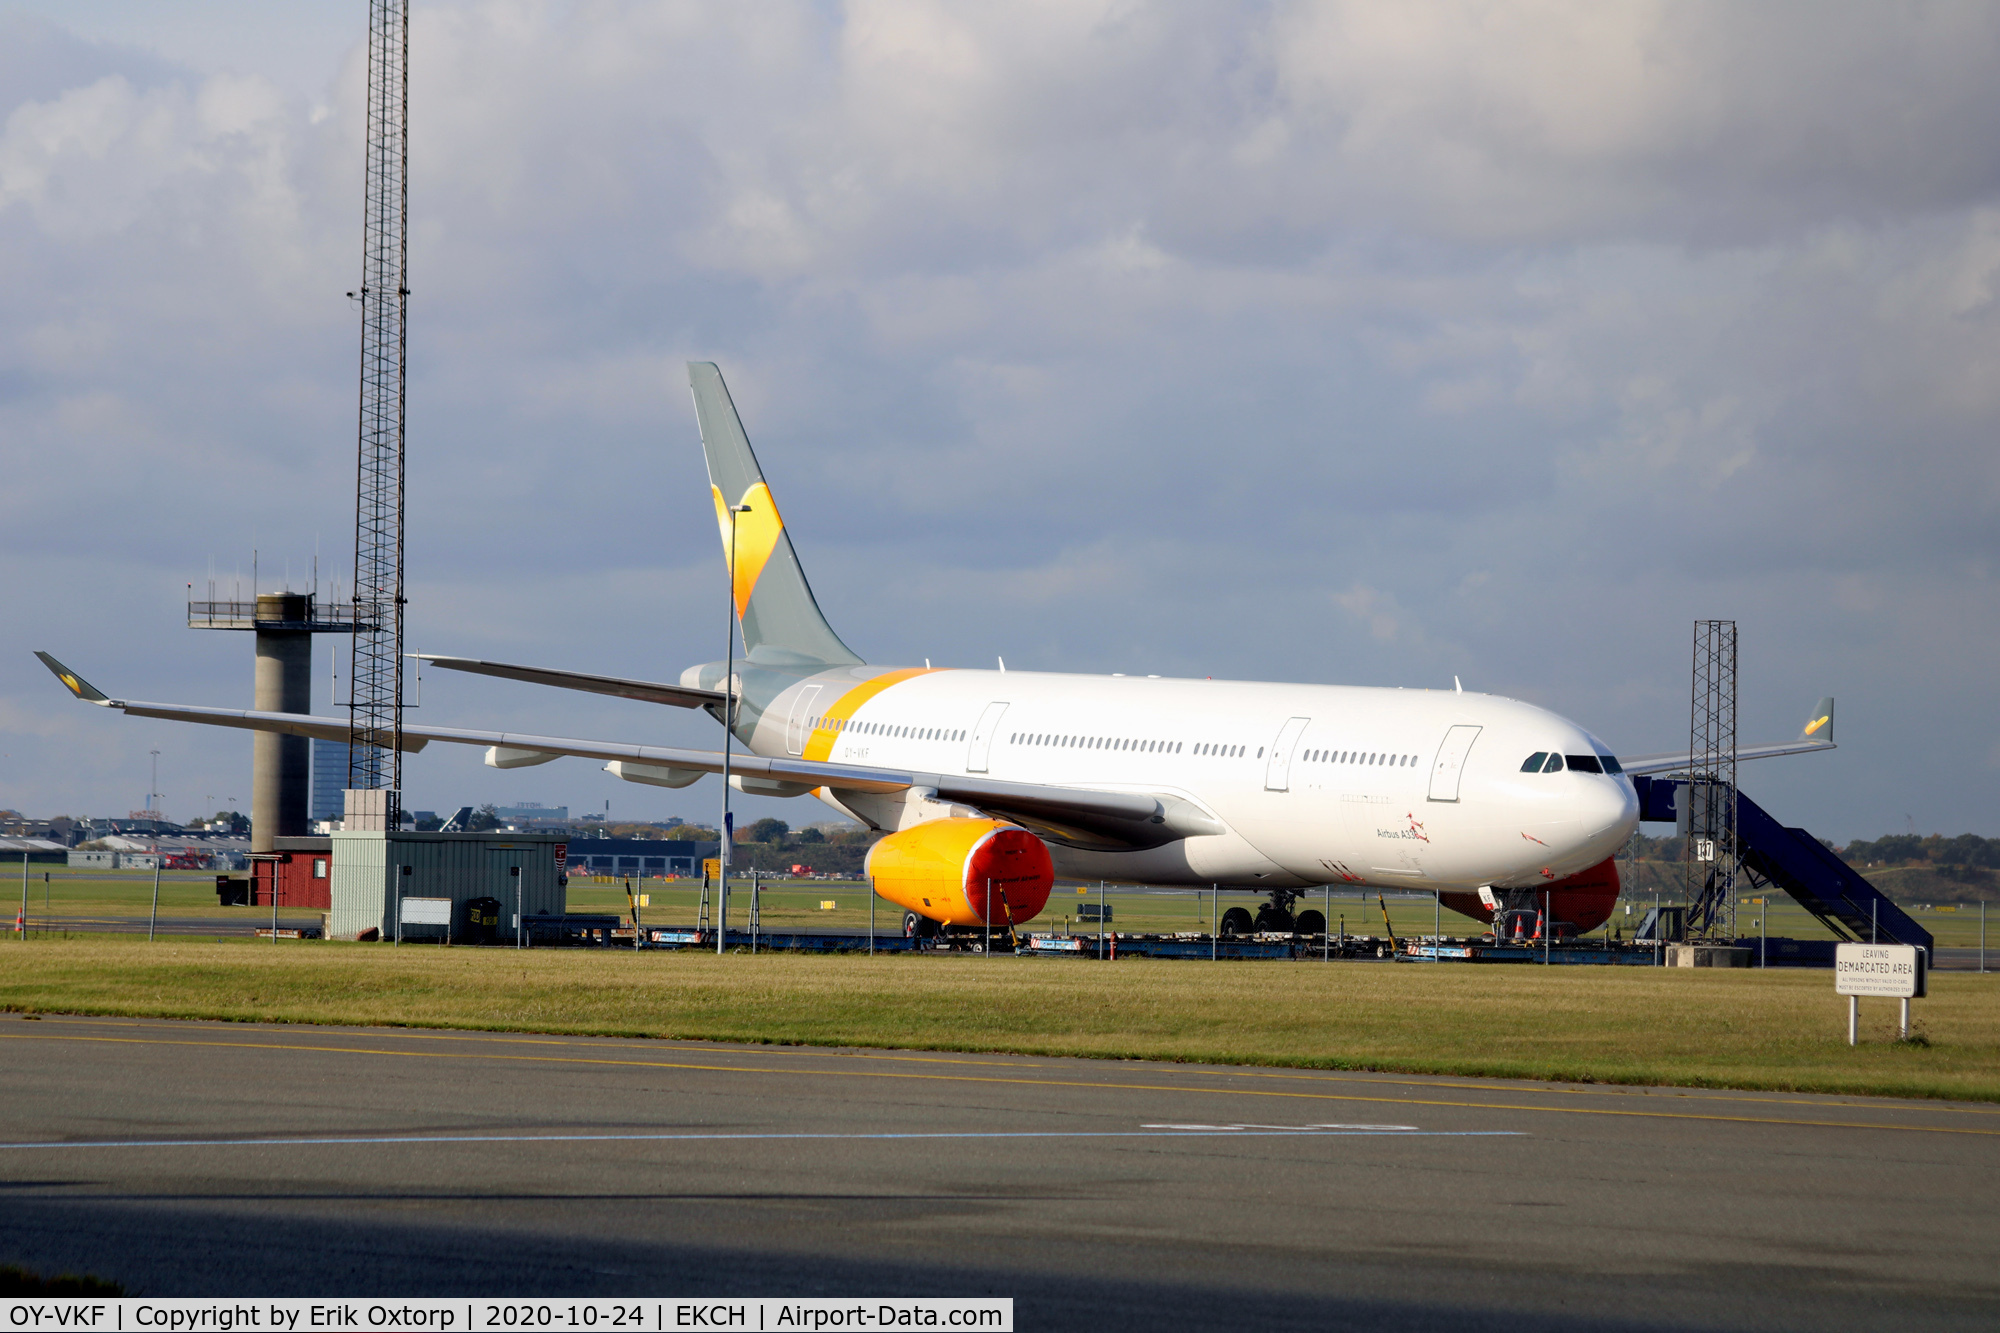 OY-VKF, 1999 Airbus A330-243 C/N 309, OY-VKF, Sunclass Airlines in CPH